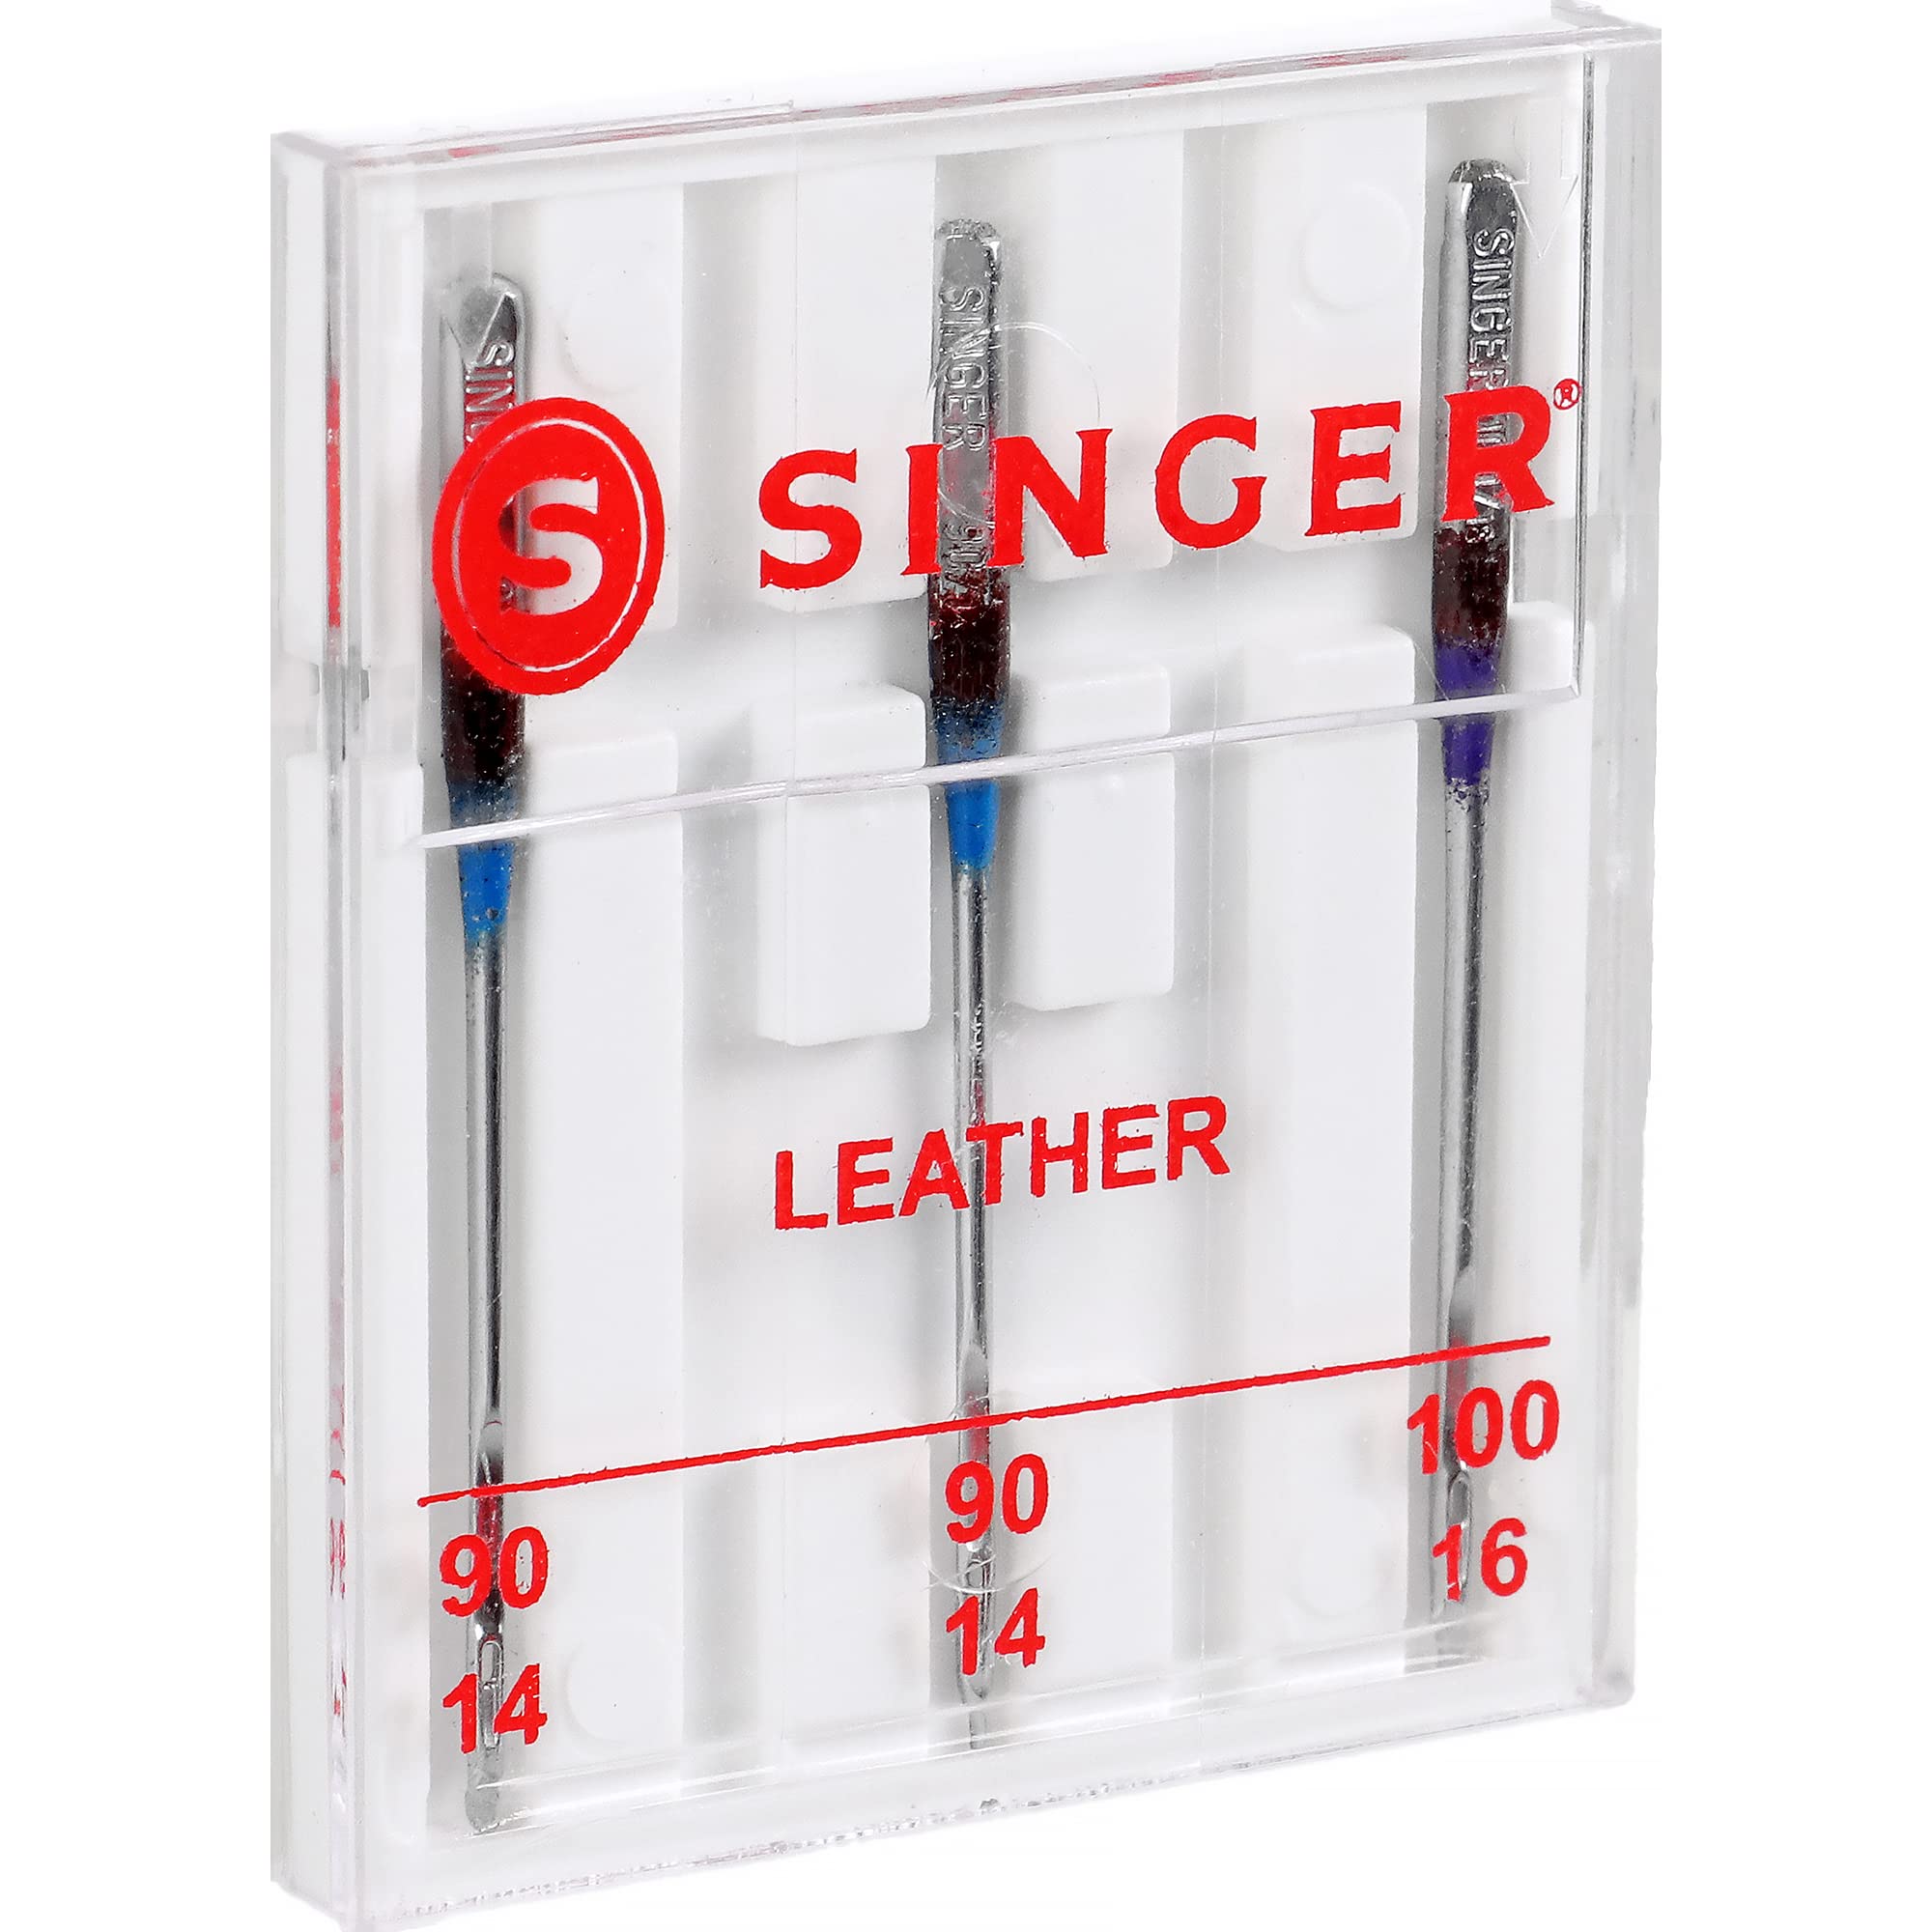 SINGER Leather Sewing Machine Needles, Size 90/14, 100/16 - 5 Count